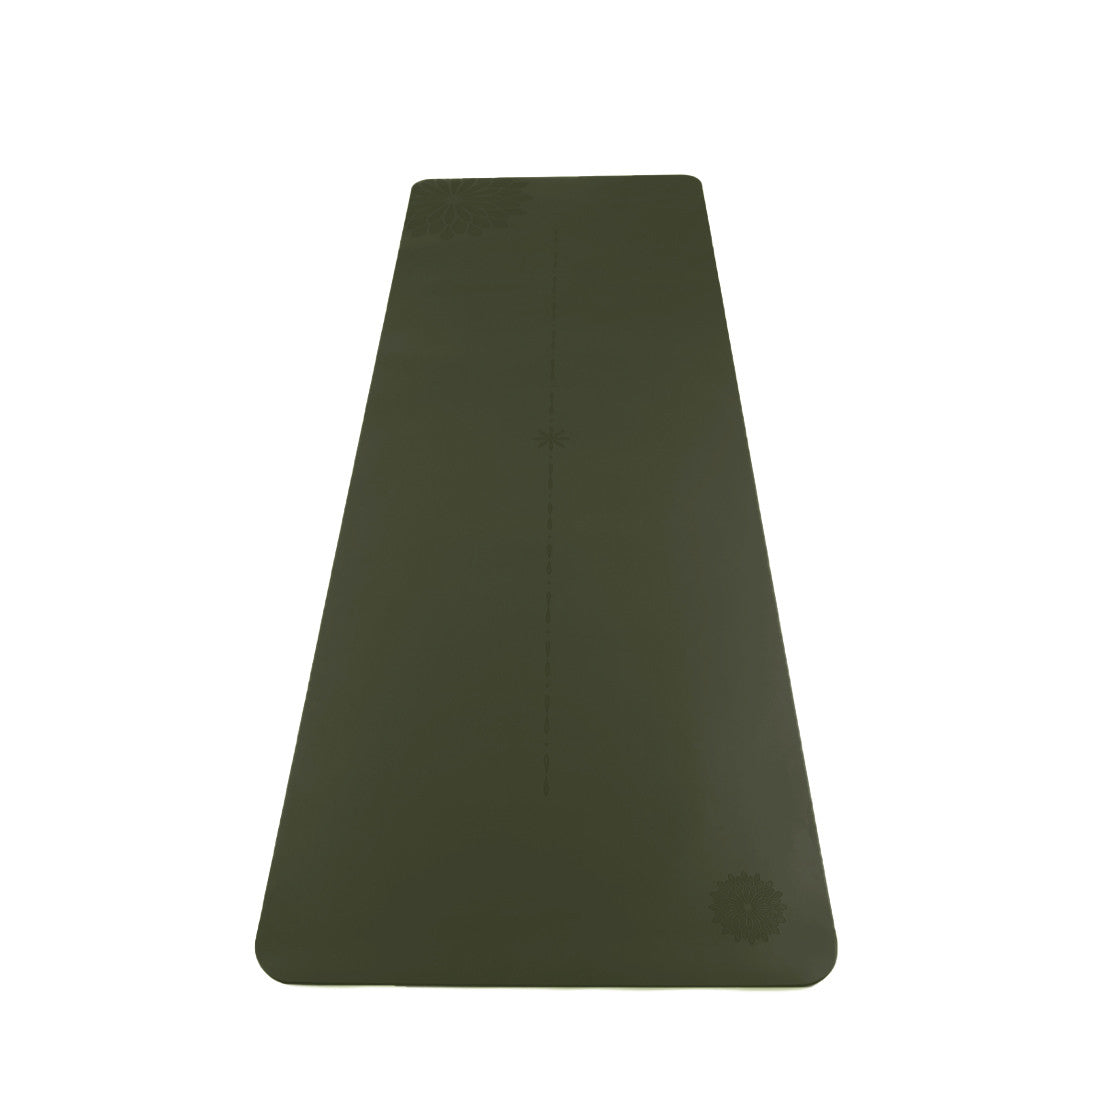 easyoga Breathin' Space Pro Mat - G14 Army Green